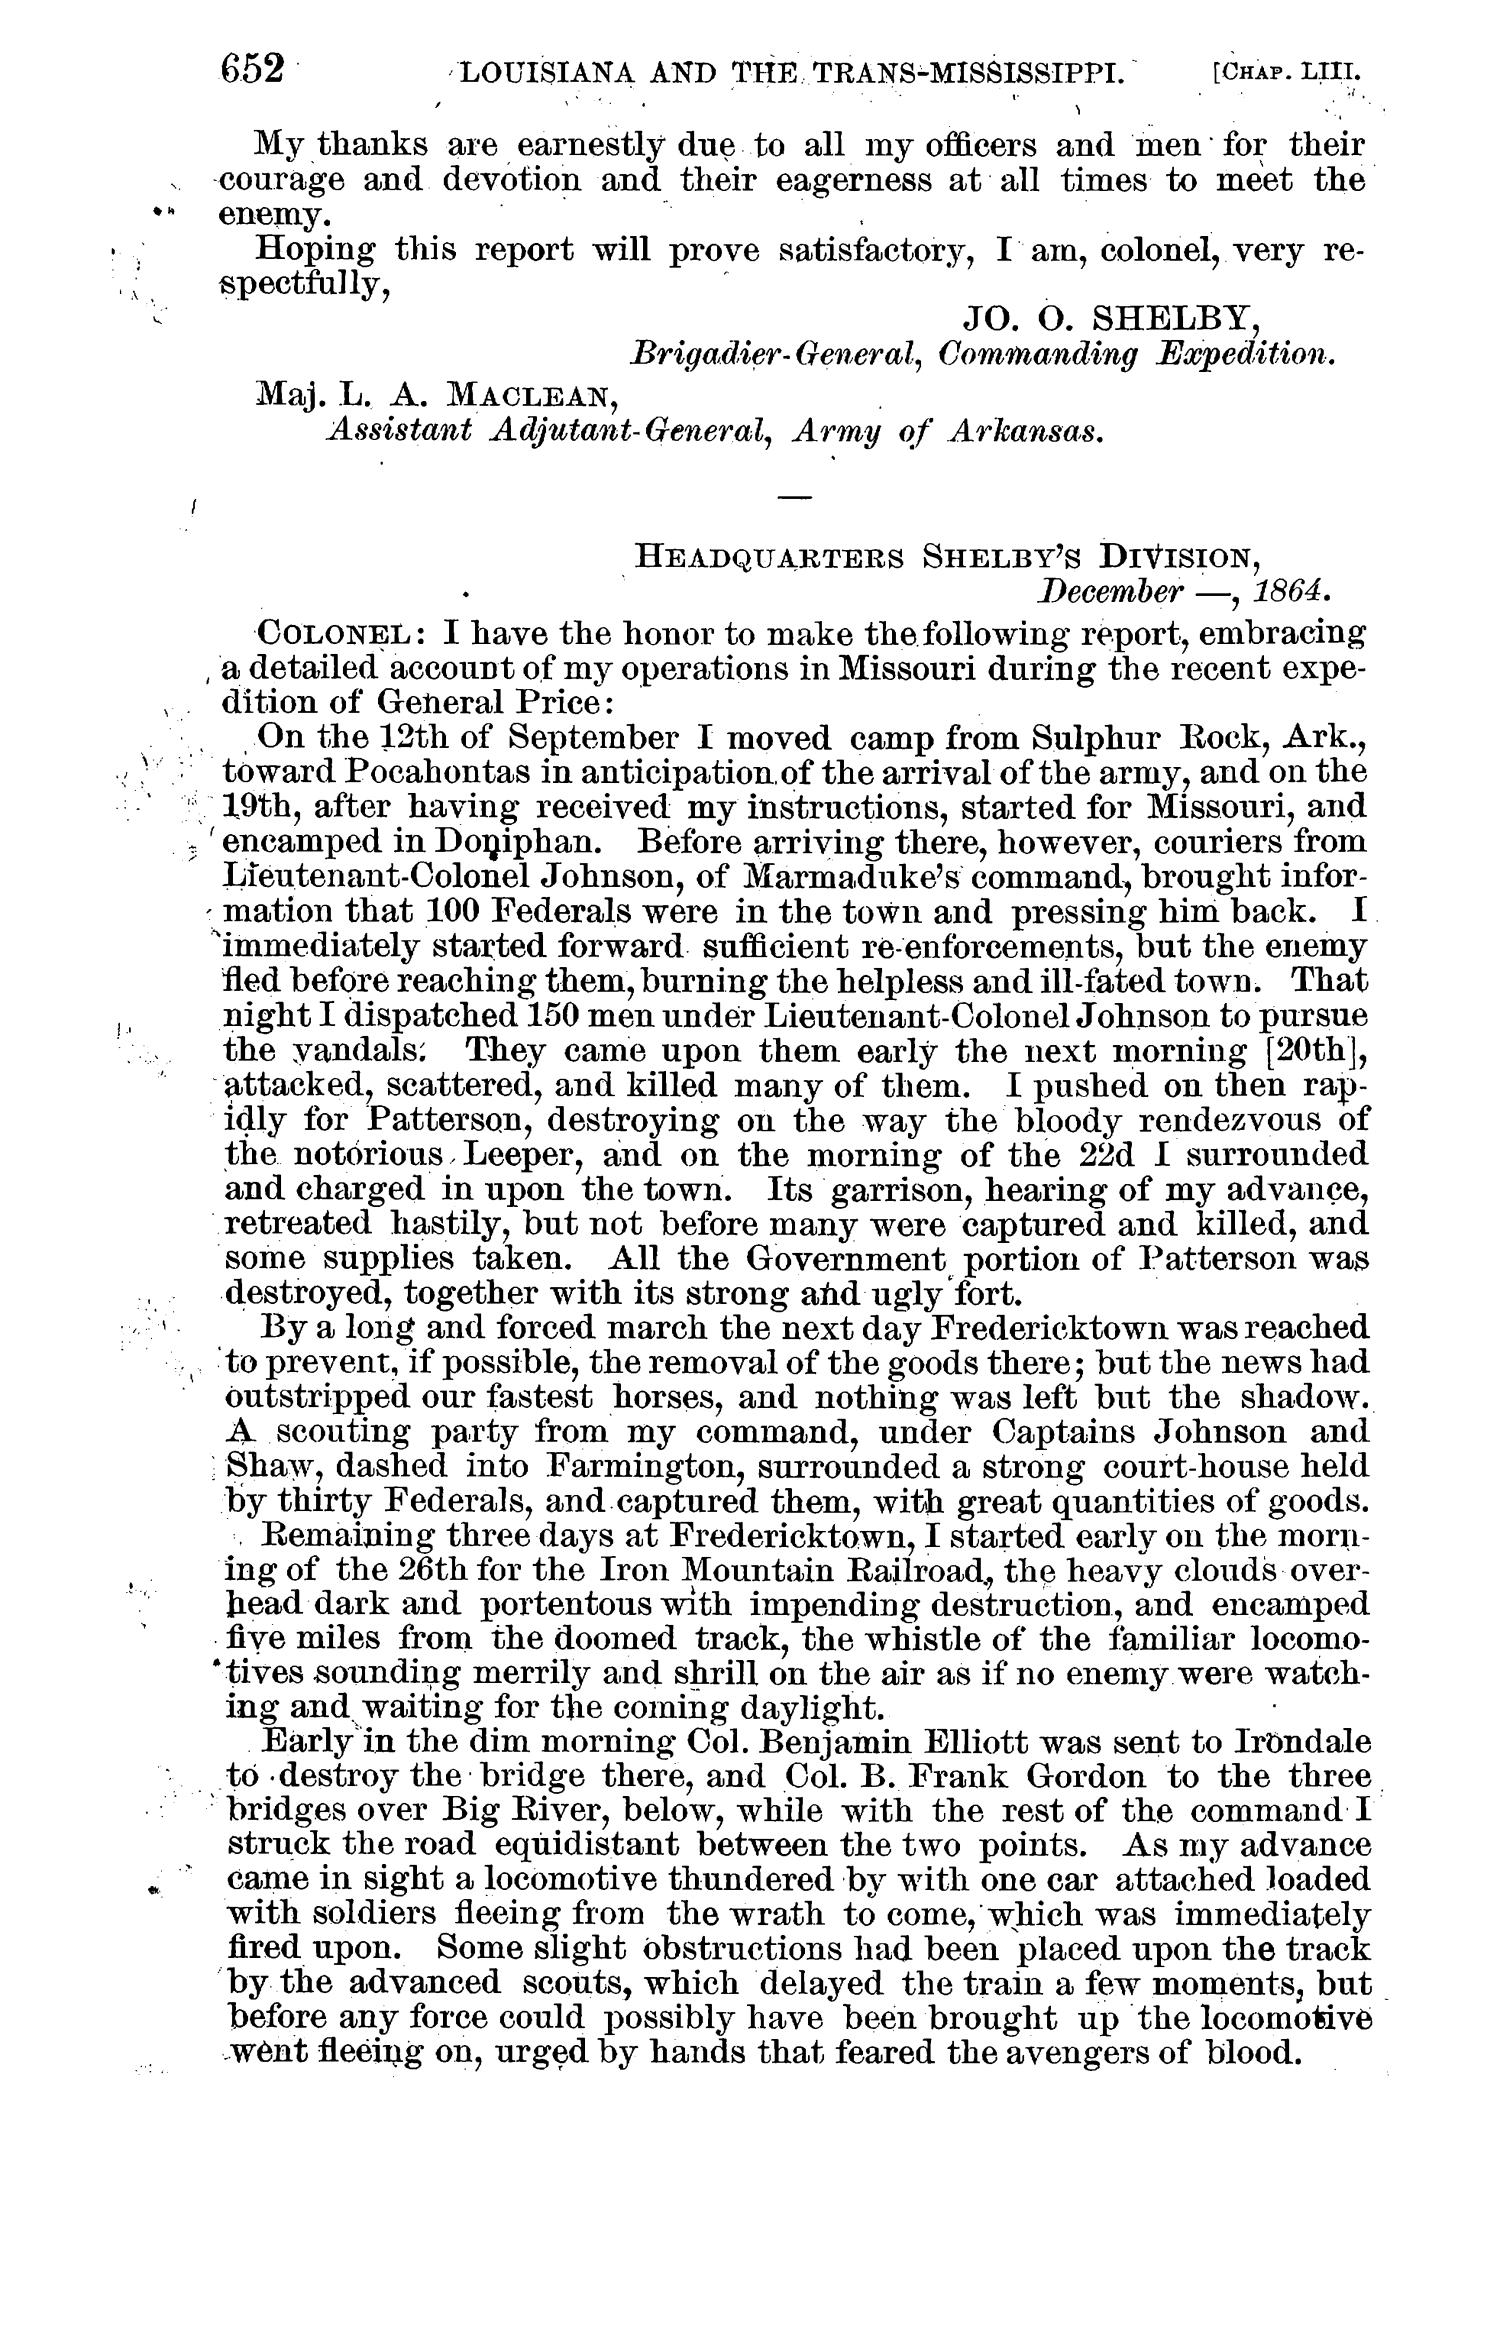 The War of the Rebellion: A Compilation of the Official Records of the Union And Confederate Armies. Series 1, Volume 41, In Four Parts. Part 1, Reports.
                                                
                                                    652
                                                